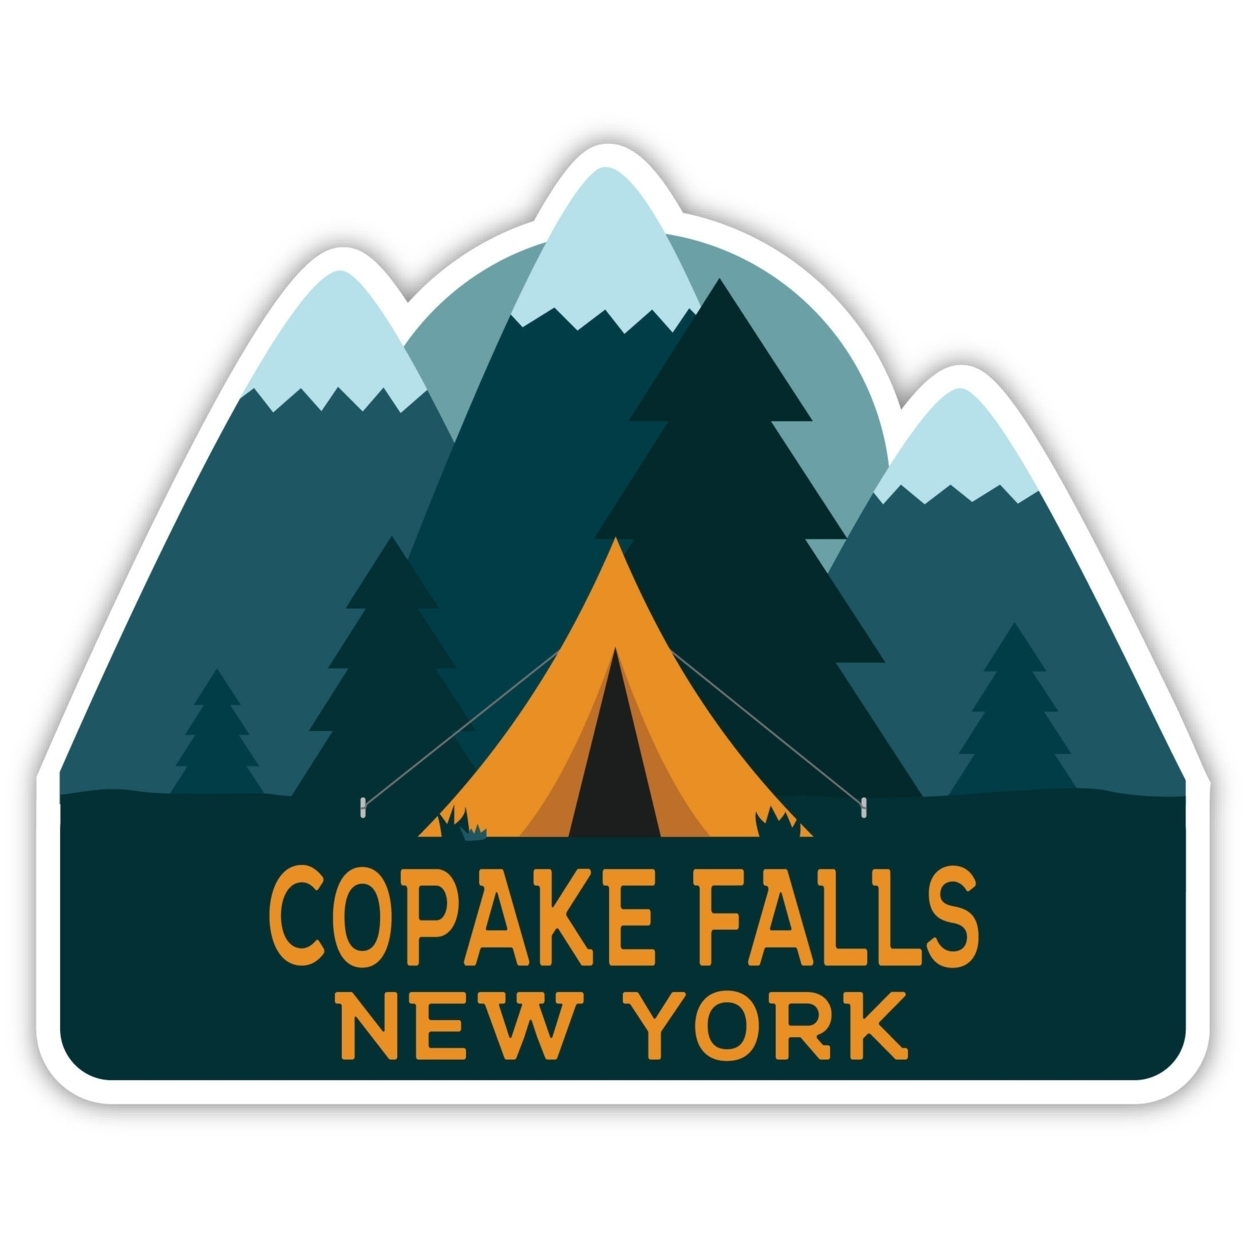 Copake Falls New York Souvenir Decorative Stickers (Choose Theme And Size) - 4-Pack, 8-Inch, Tent